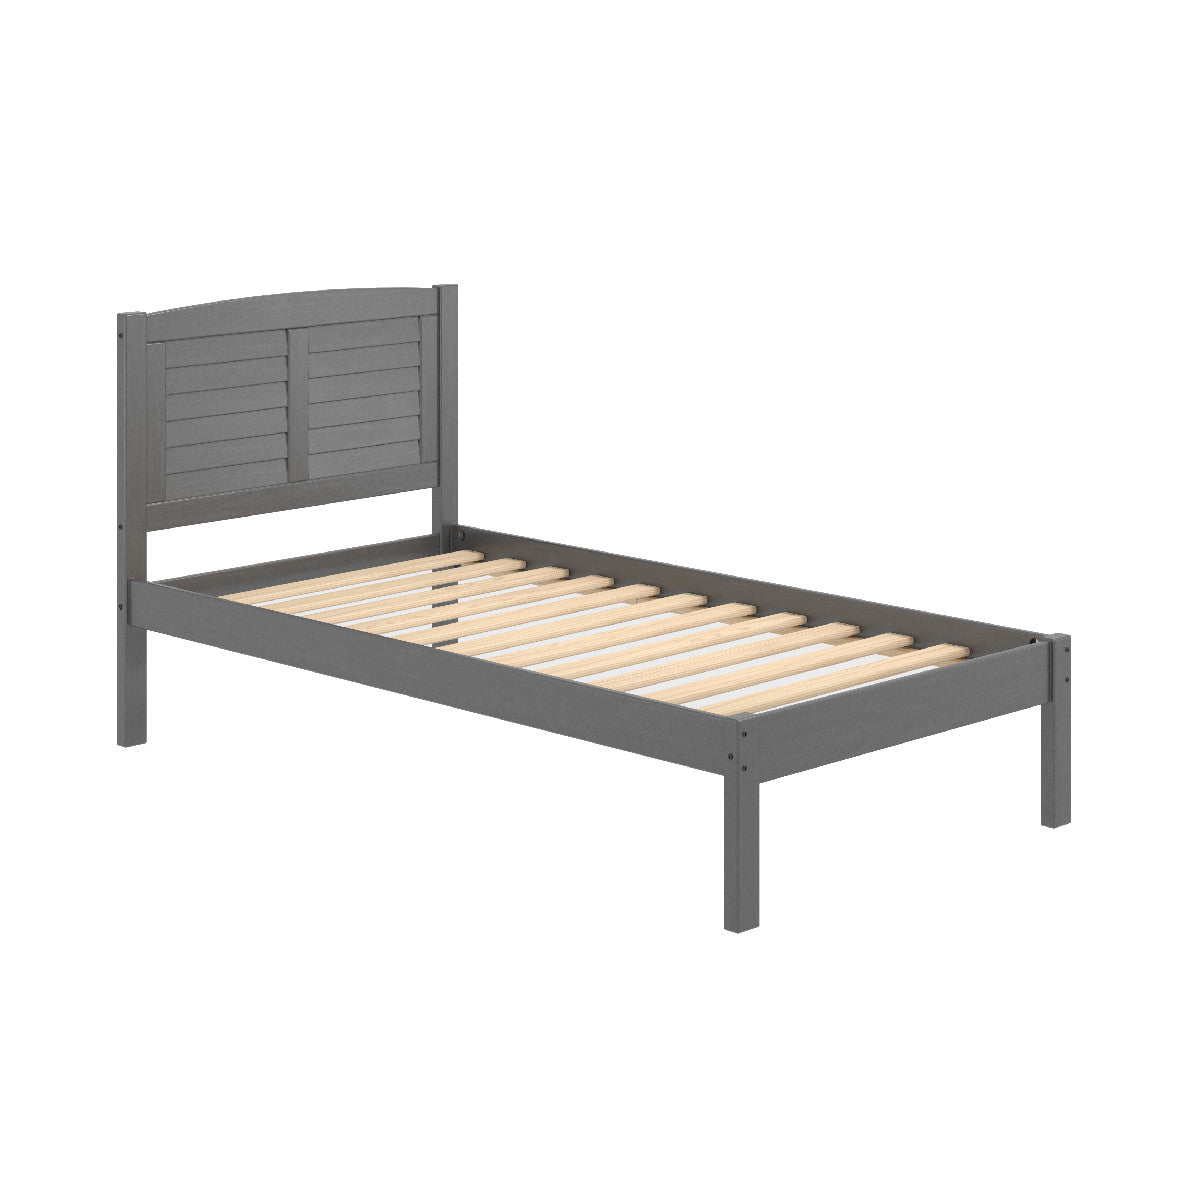 TWIN LOUVER BED ANTIQUE GREY